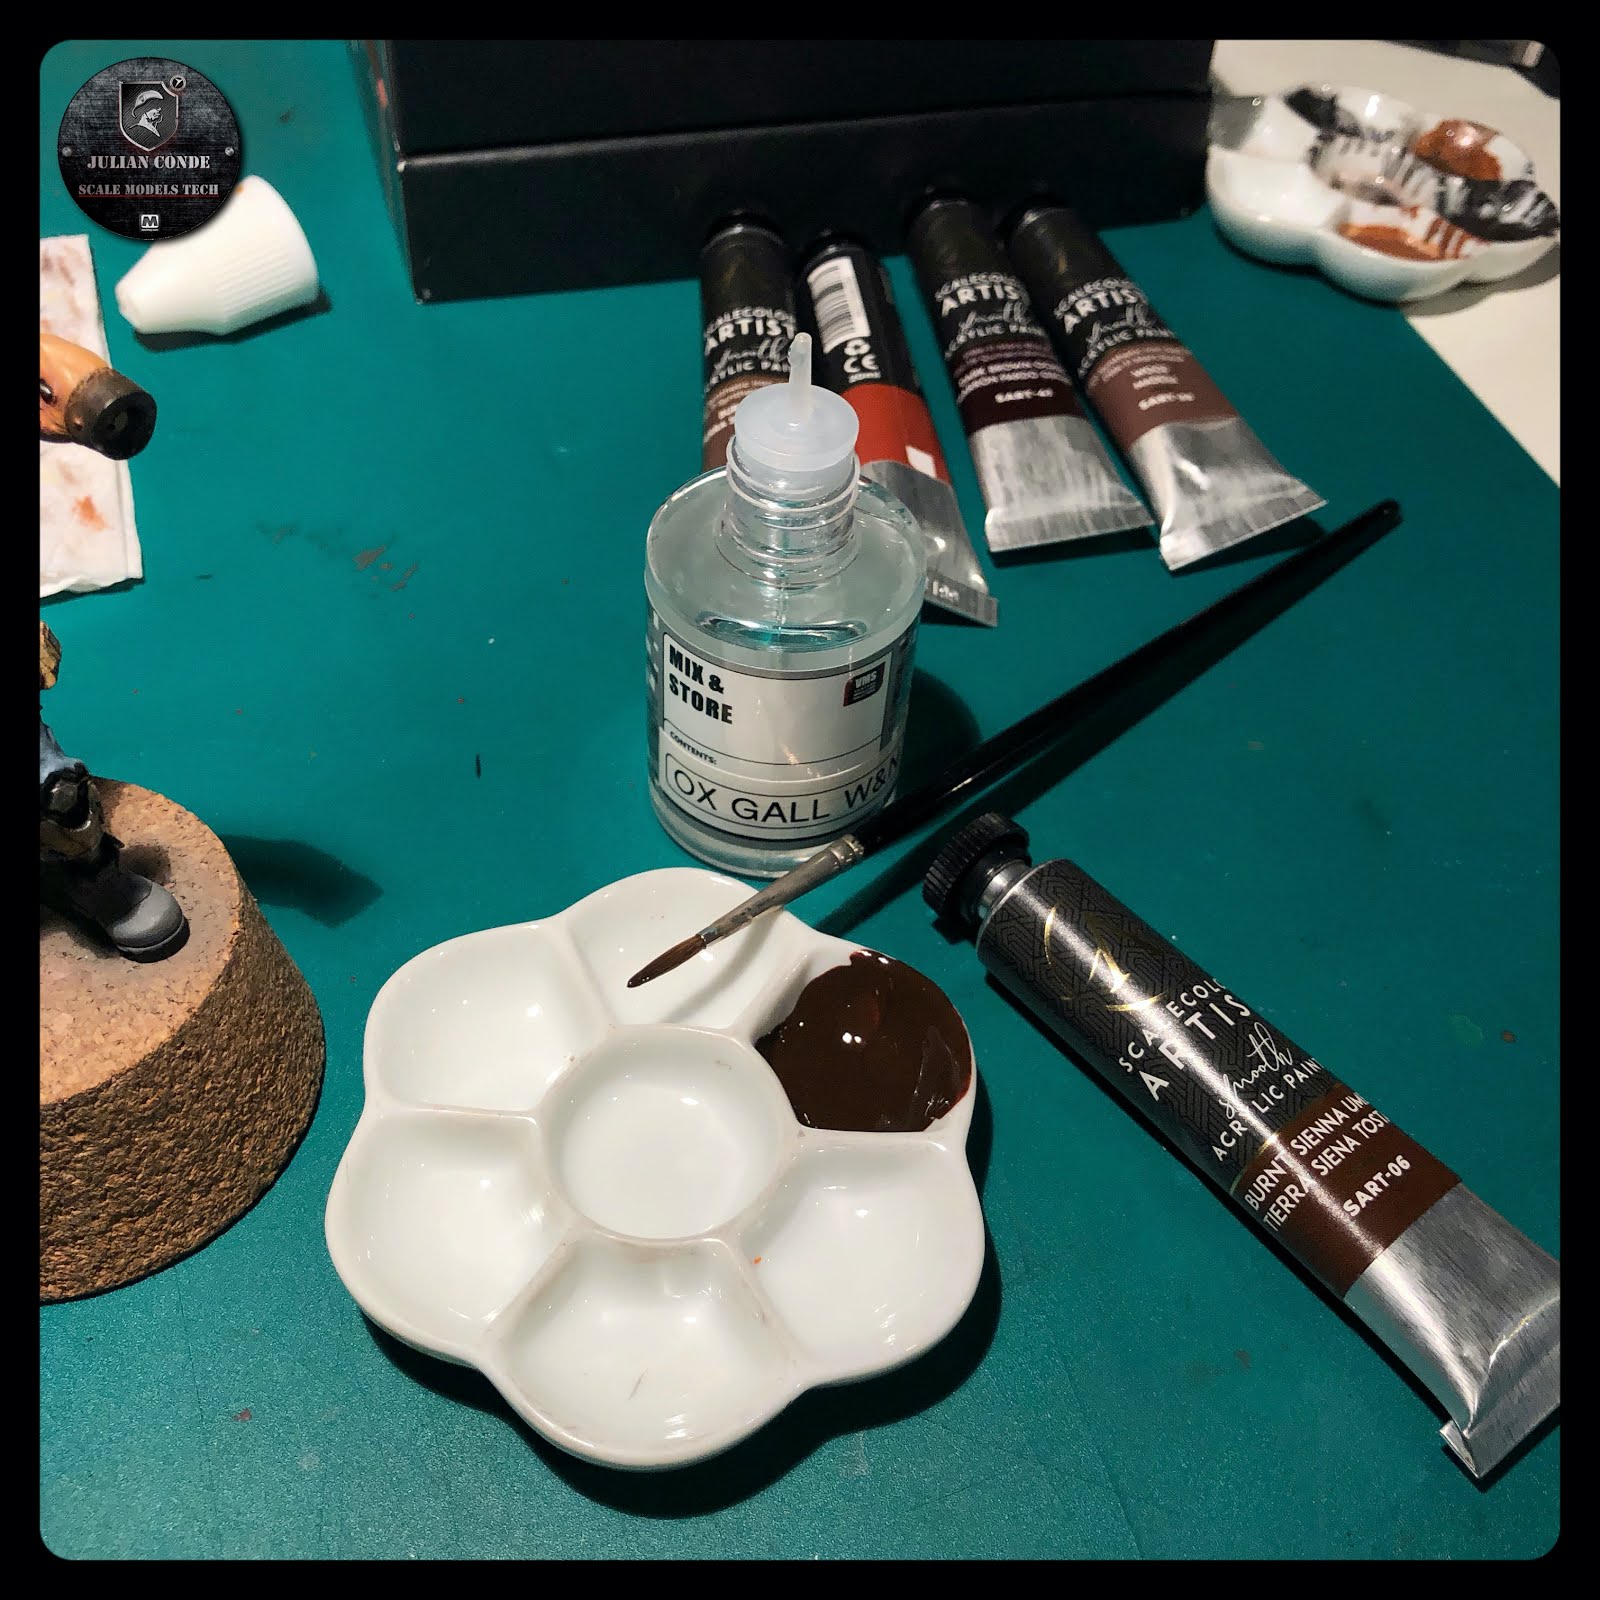 News From The Front: MichToy TRENCH RUNNER DISPATCH: WINSOR & NEWTON 7  SERIES BRUSHES The WORLD'S FINEST BRUSHES! by JULIAN CONDE